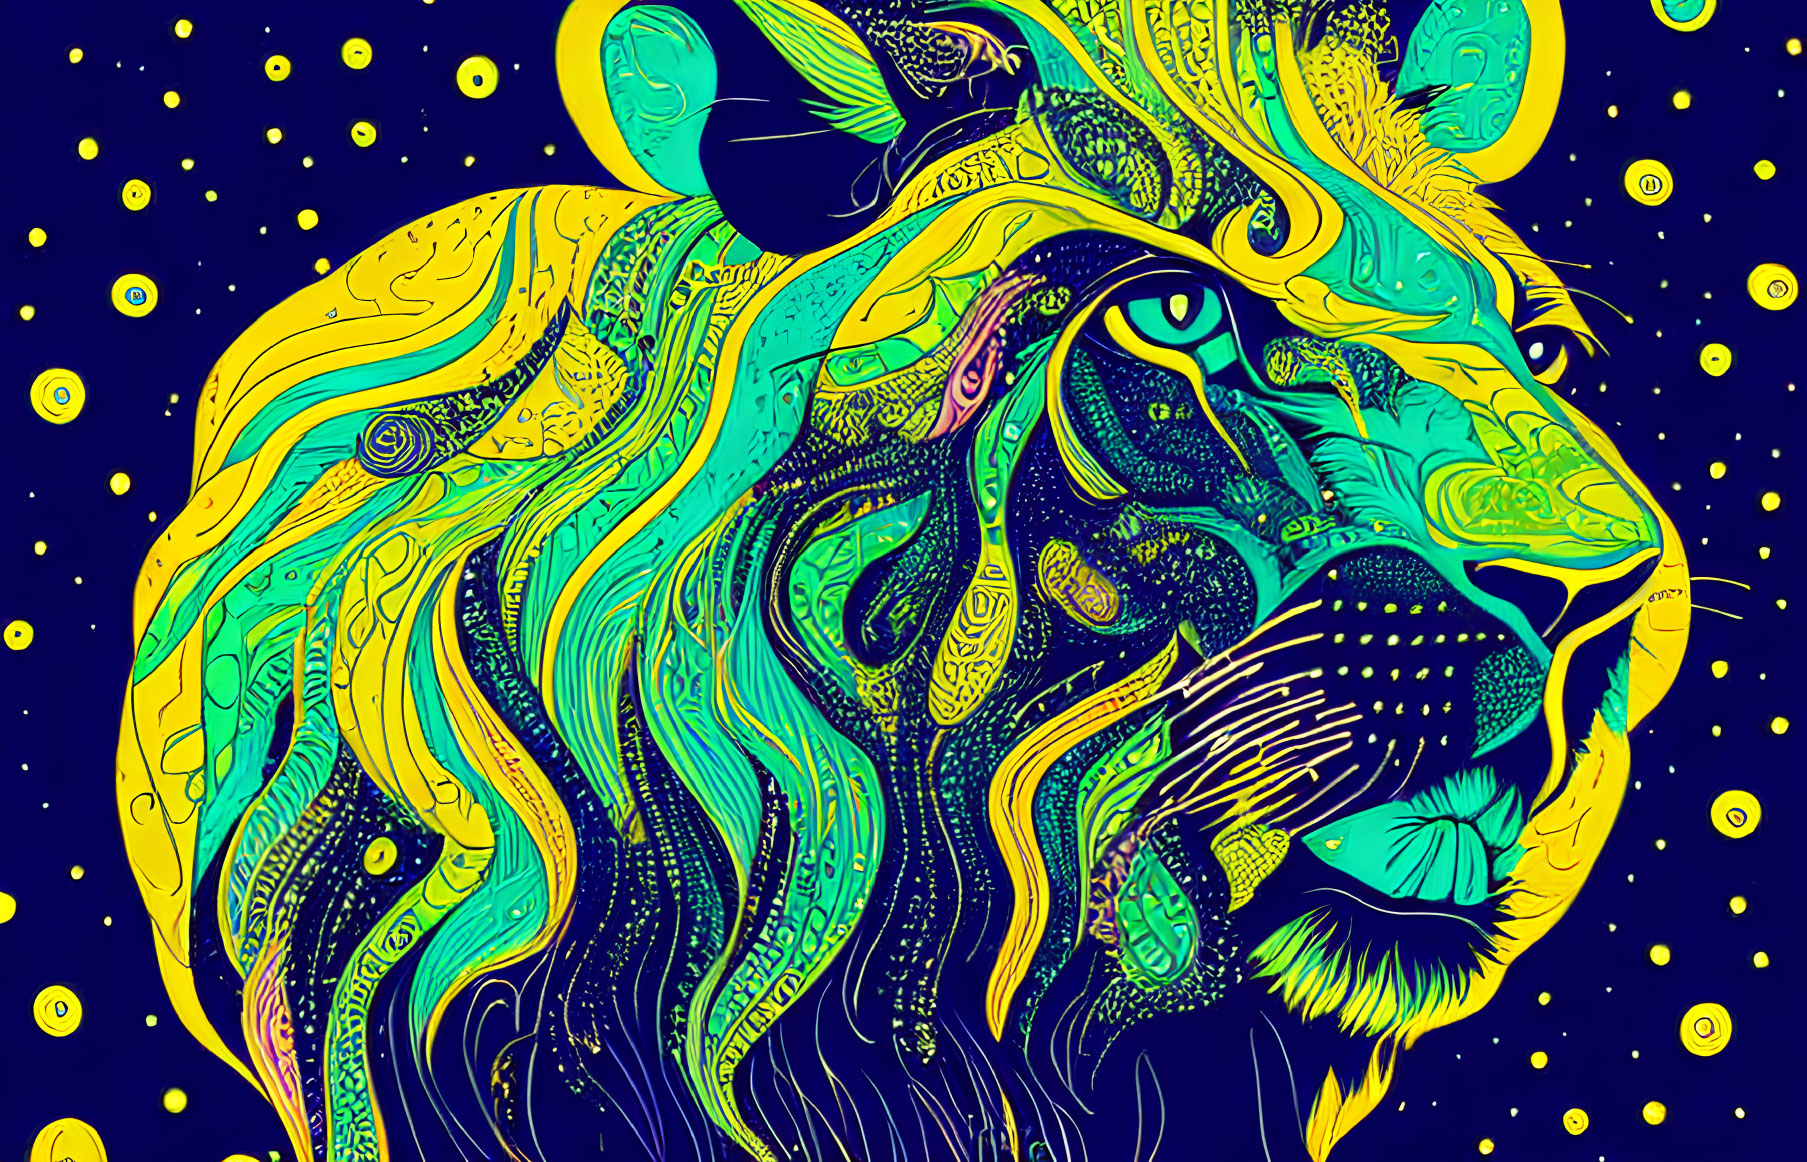 Vibrant abstract lion illustration on starry blue backdrop